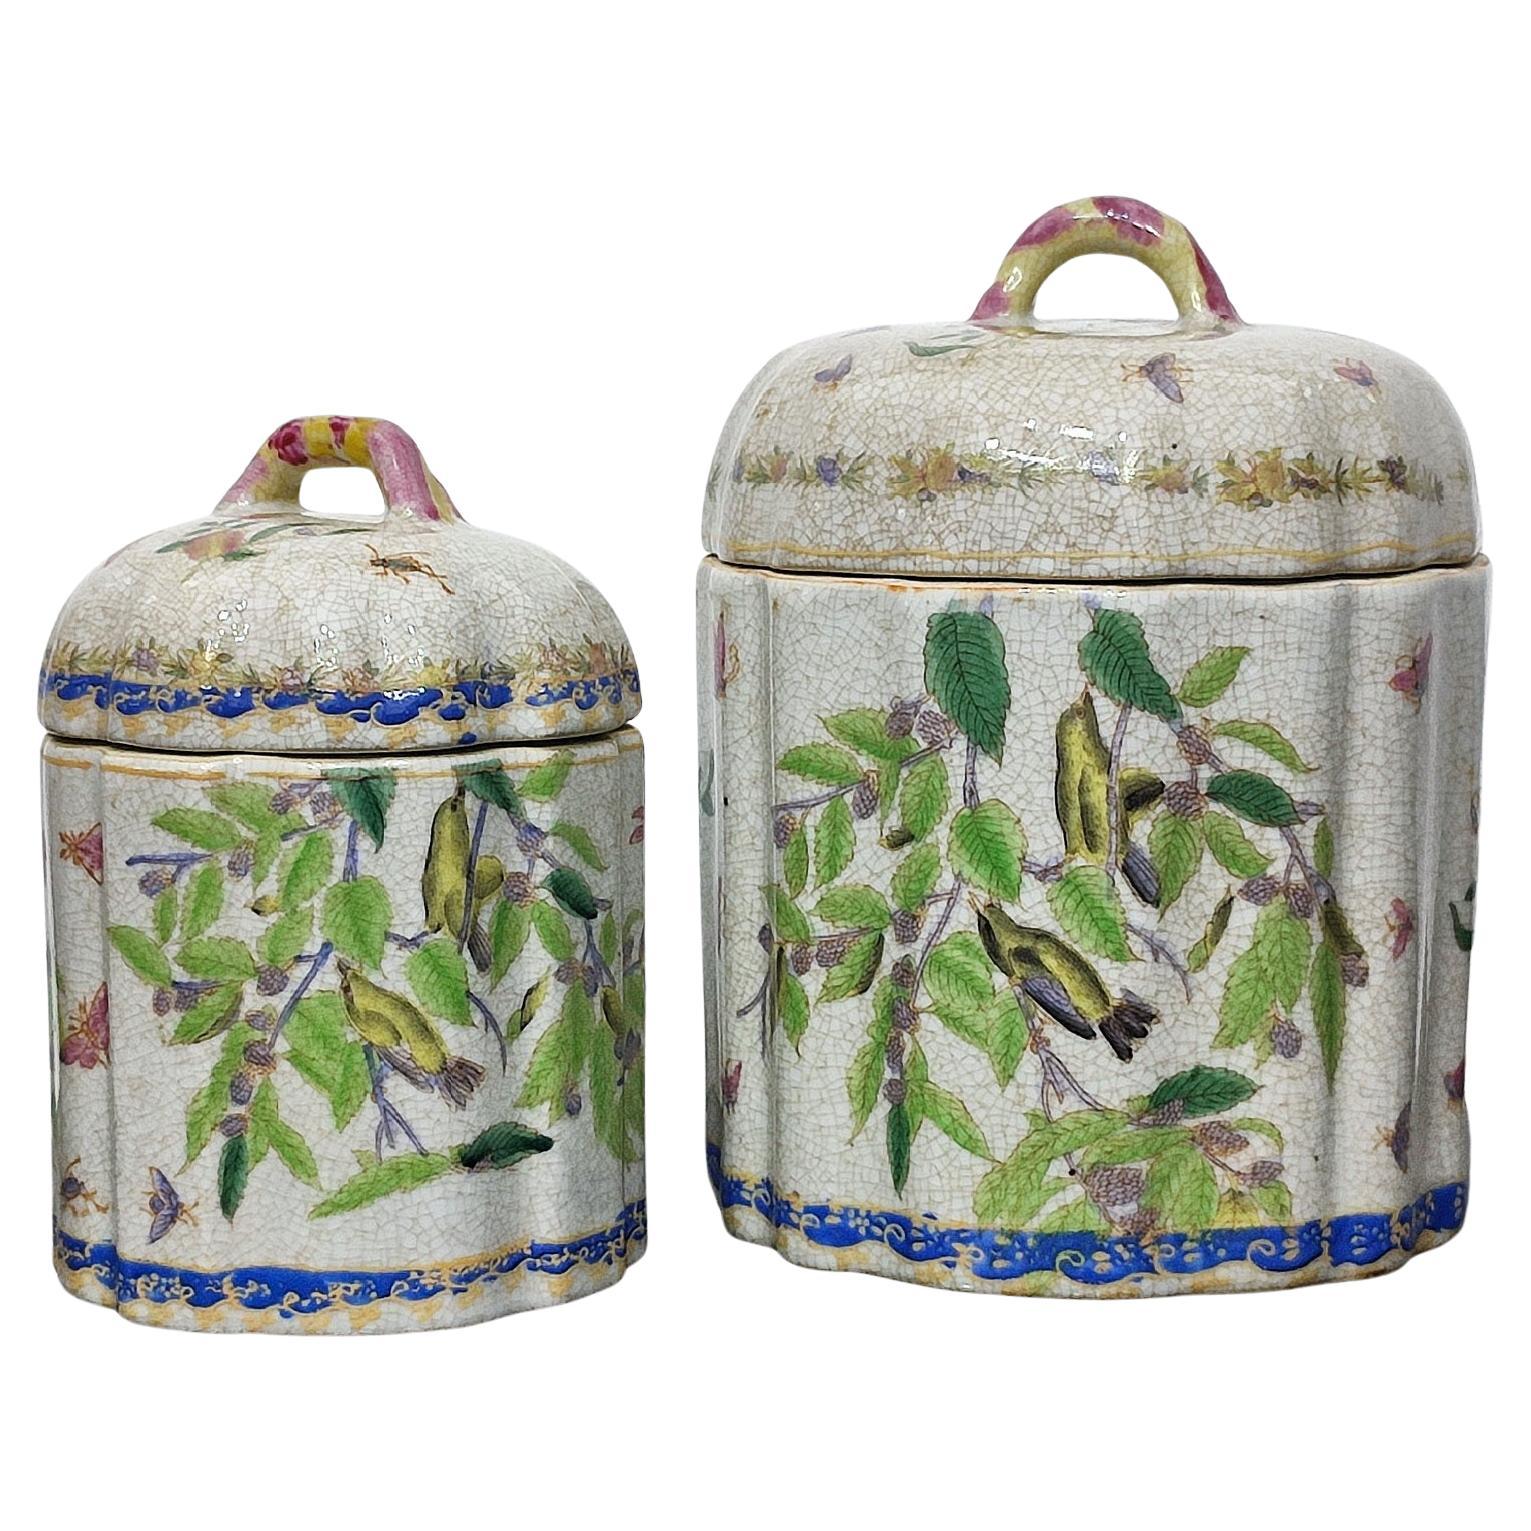 Pair of Craqueled Ceramic Lidded Jars, Vintage from the 1990s - FREE SHIPPING For Sale